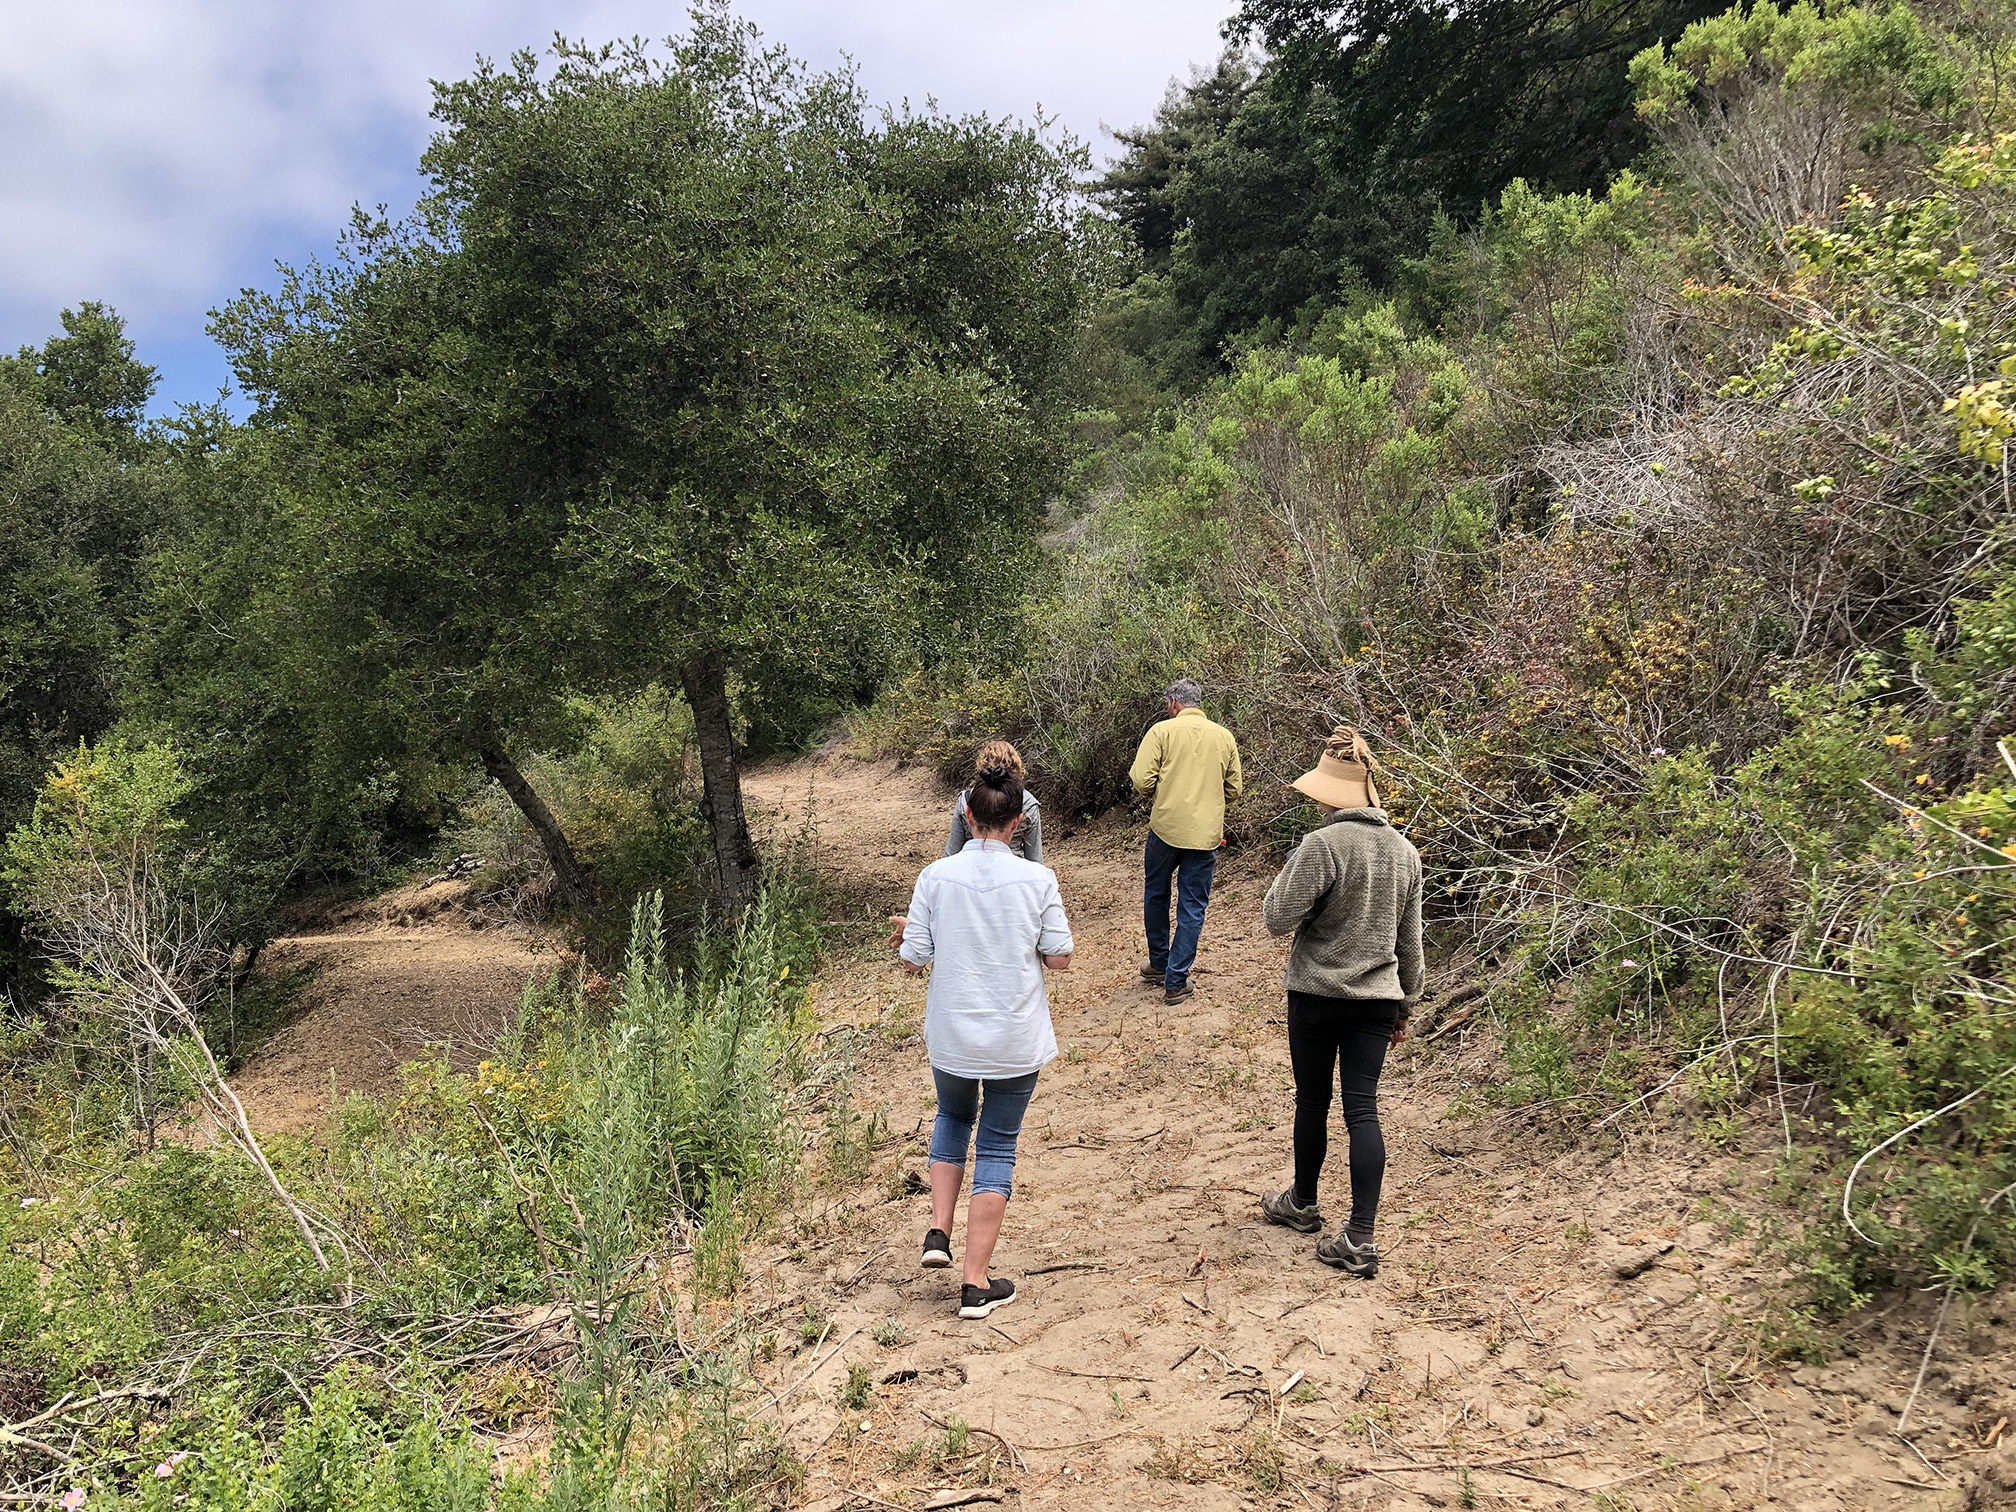 A small group of people walks along a wide strip of bare earth at the bottom of a steep hill. They are wearing blue jeans; one has a yellow shirt, one a pale blue shirt, and another a gray-brown jacket. Either side of the earth strip are plants. The hillside is covered in bushes and trees.